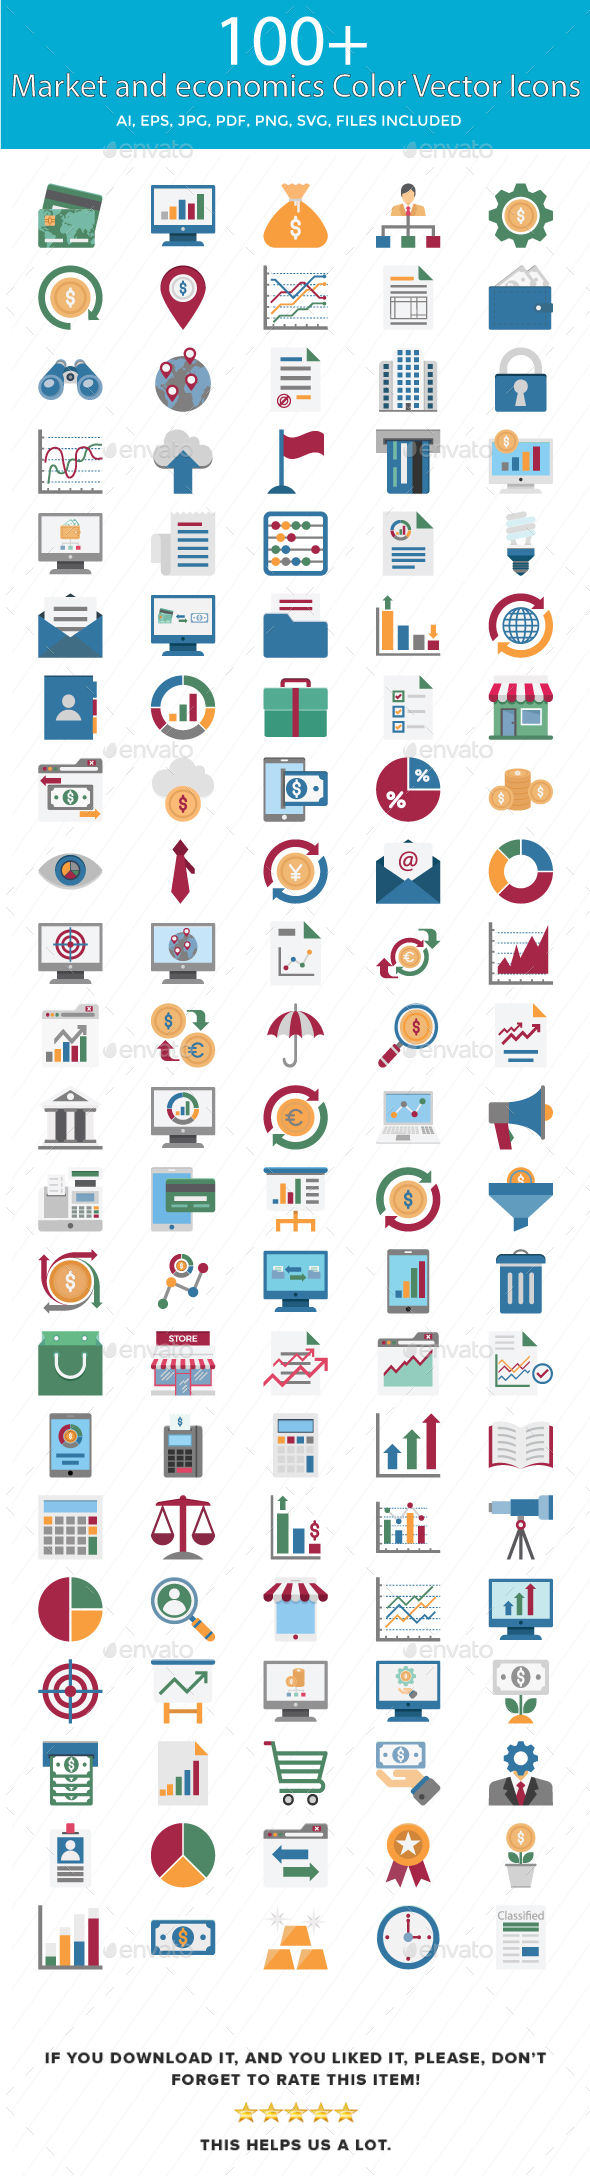 Market and Economics Color Vector Icons